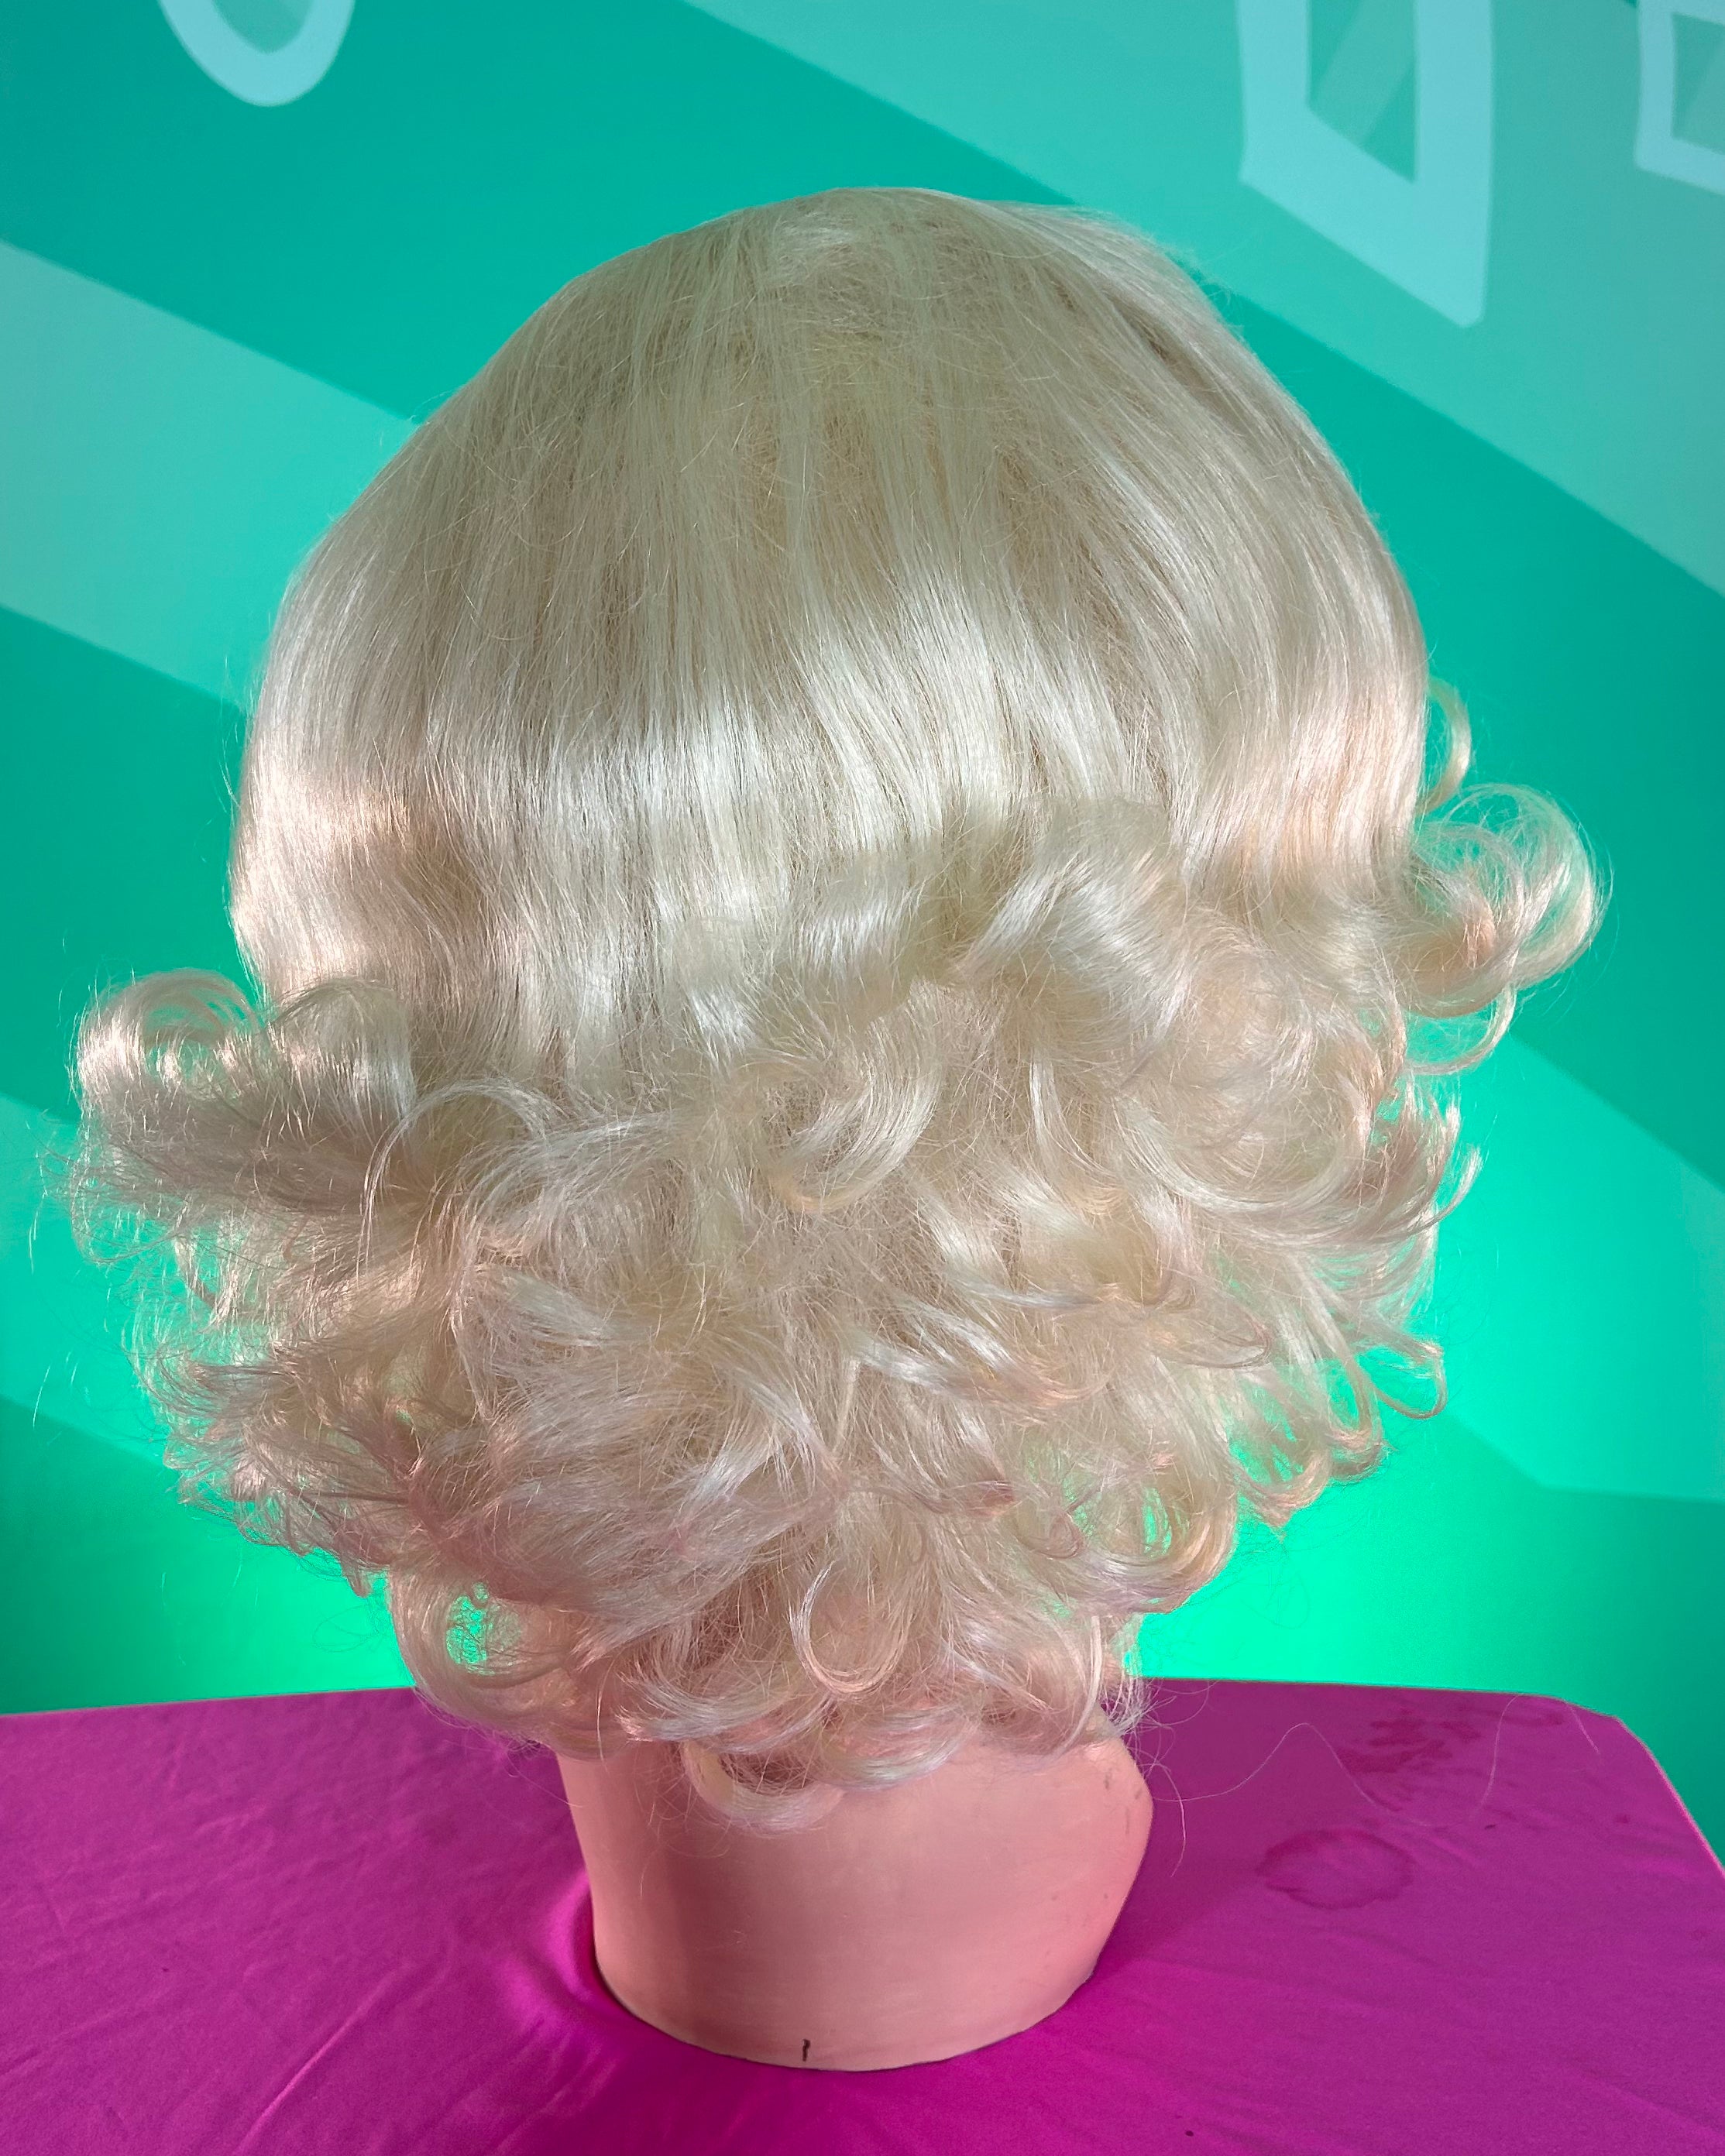 AS SEEN ON YOUTUBE: BUBBLY BLONDE